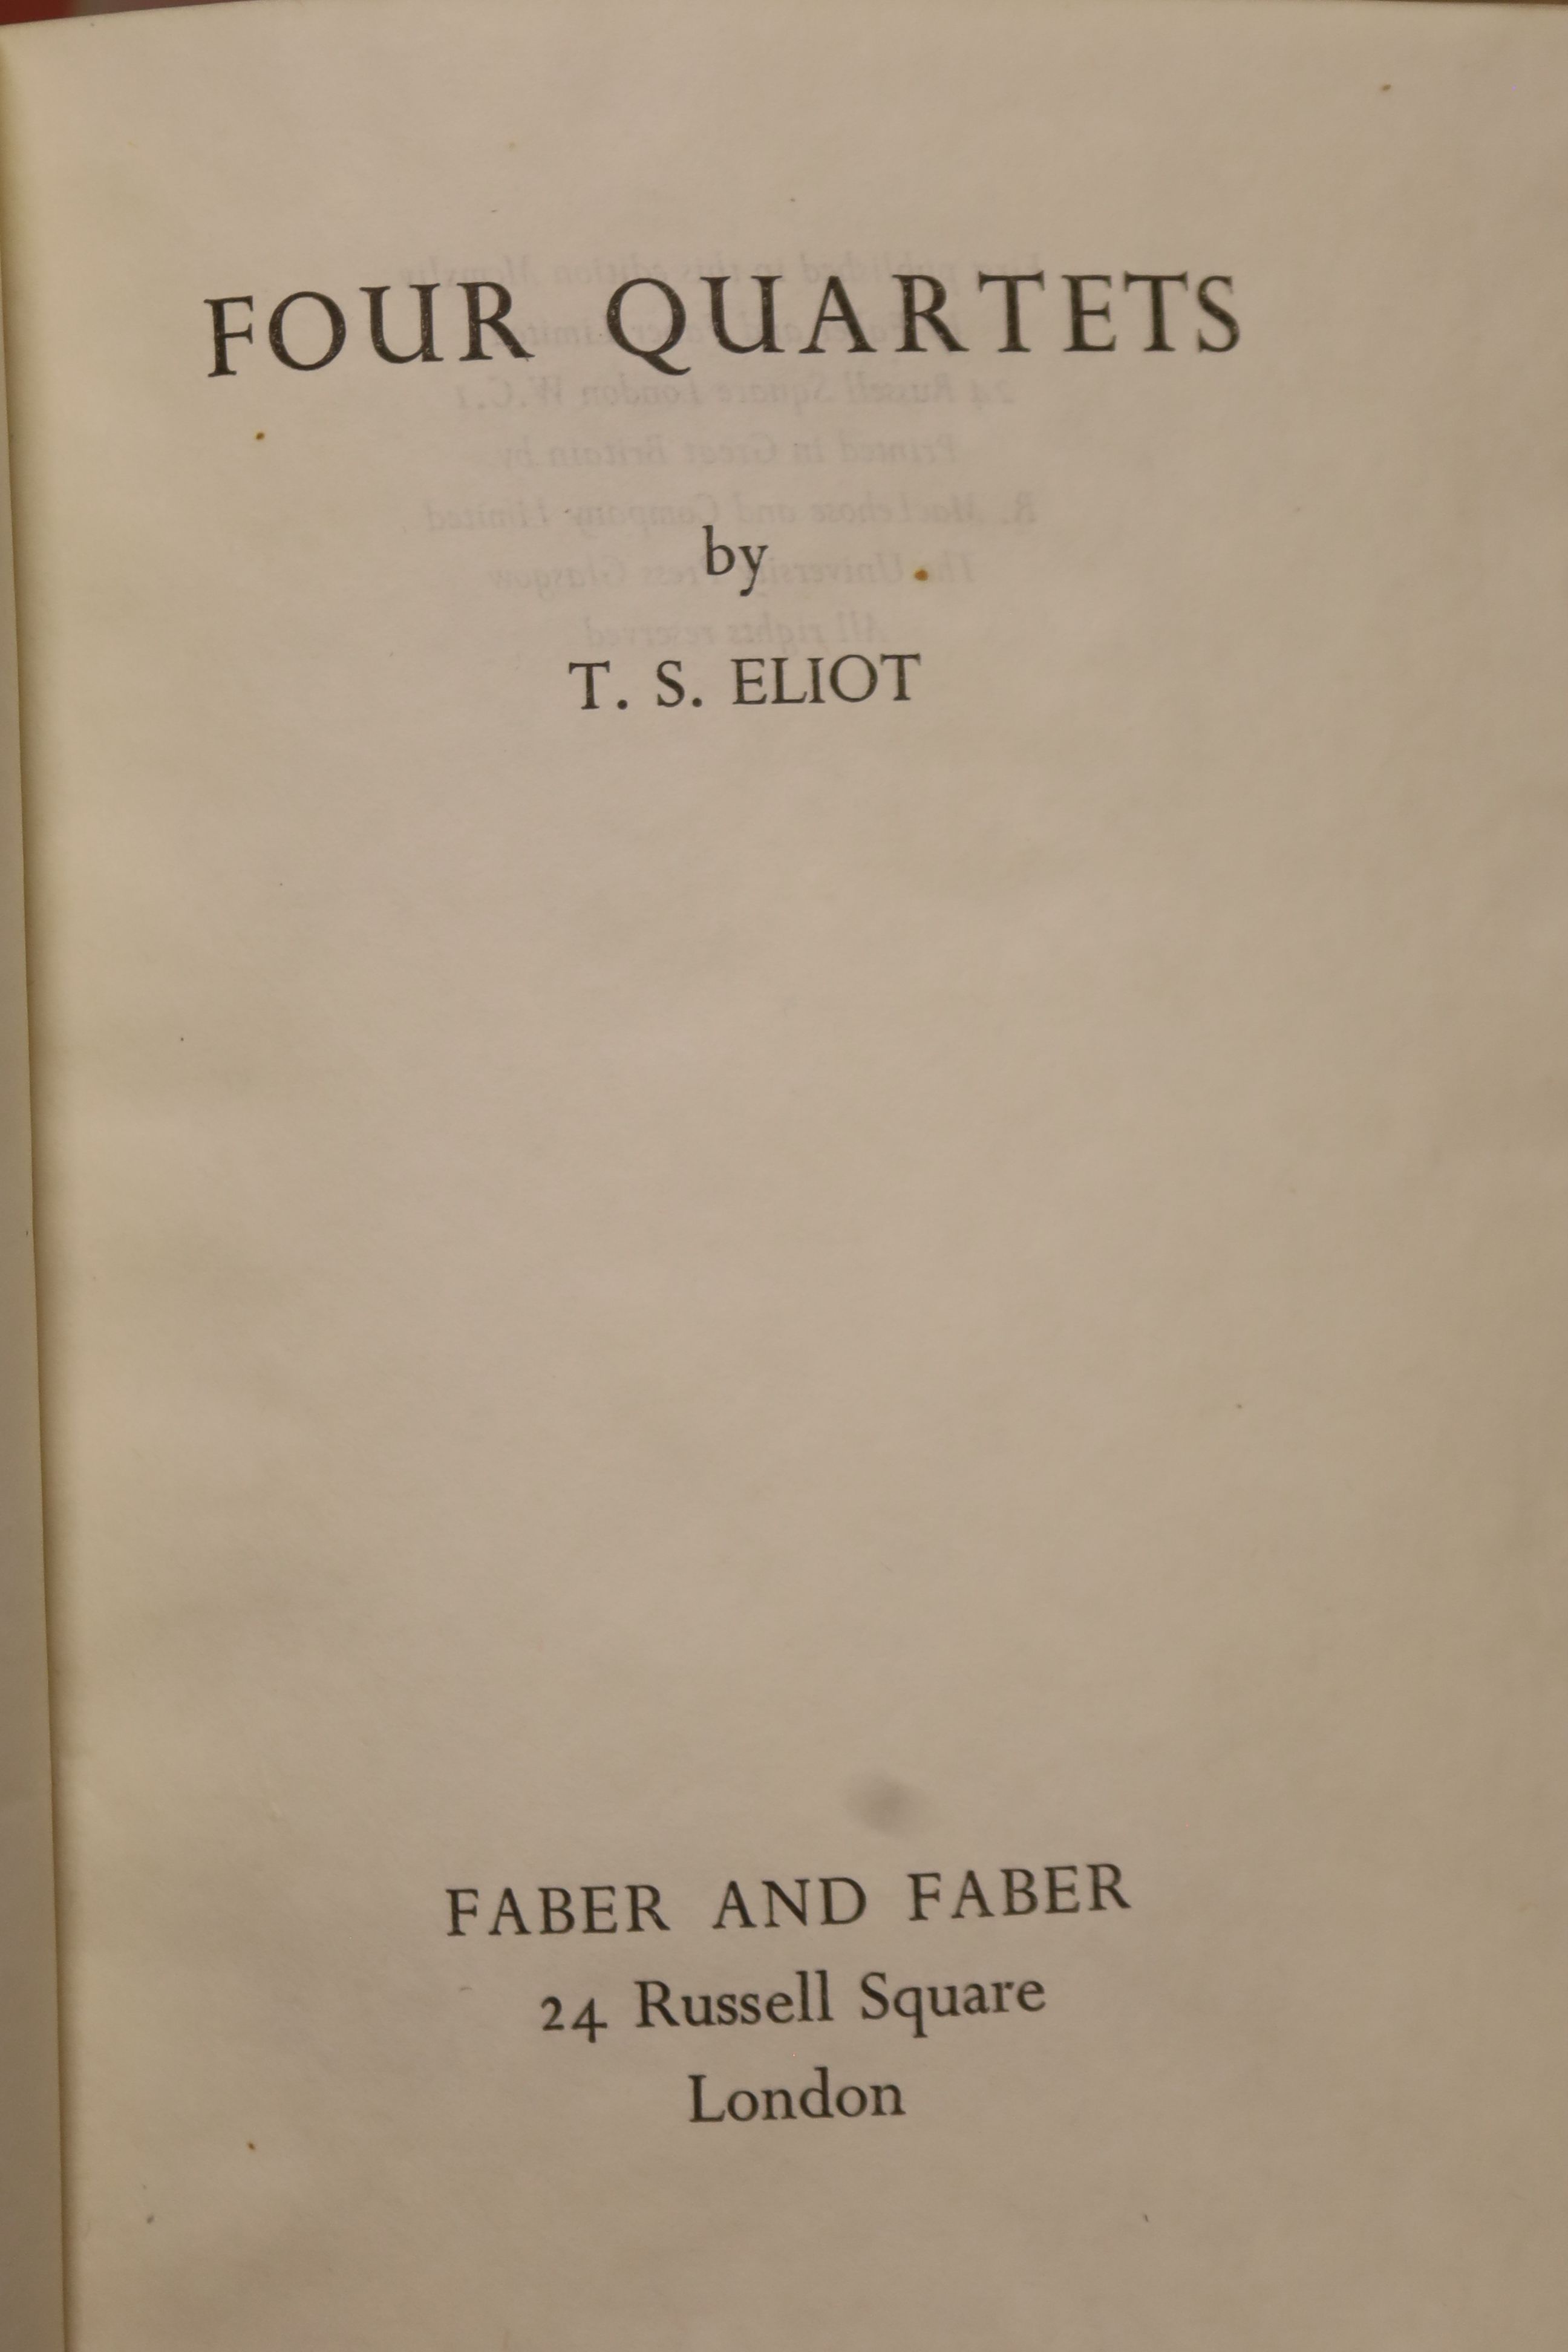 Eliot, T.S. – The Waste Land: a facsimile and transcript of the original drafts …, edited by Valerie Eliot, limited edition (500 numbered copies)